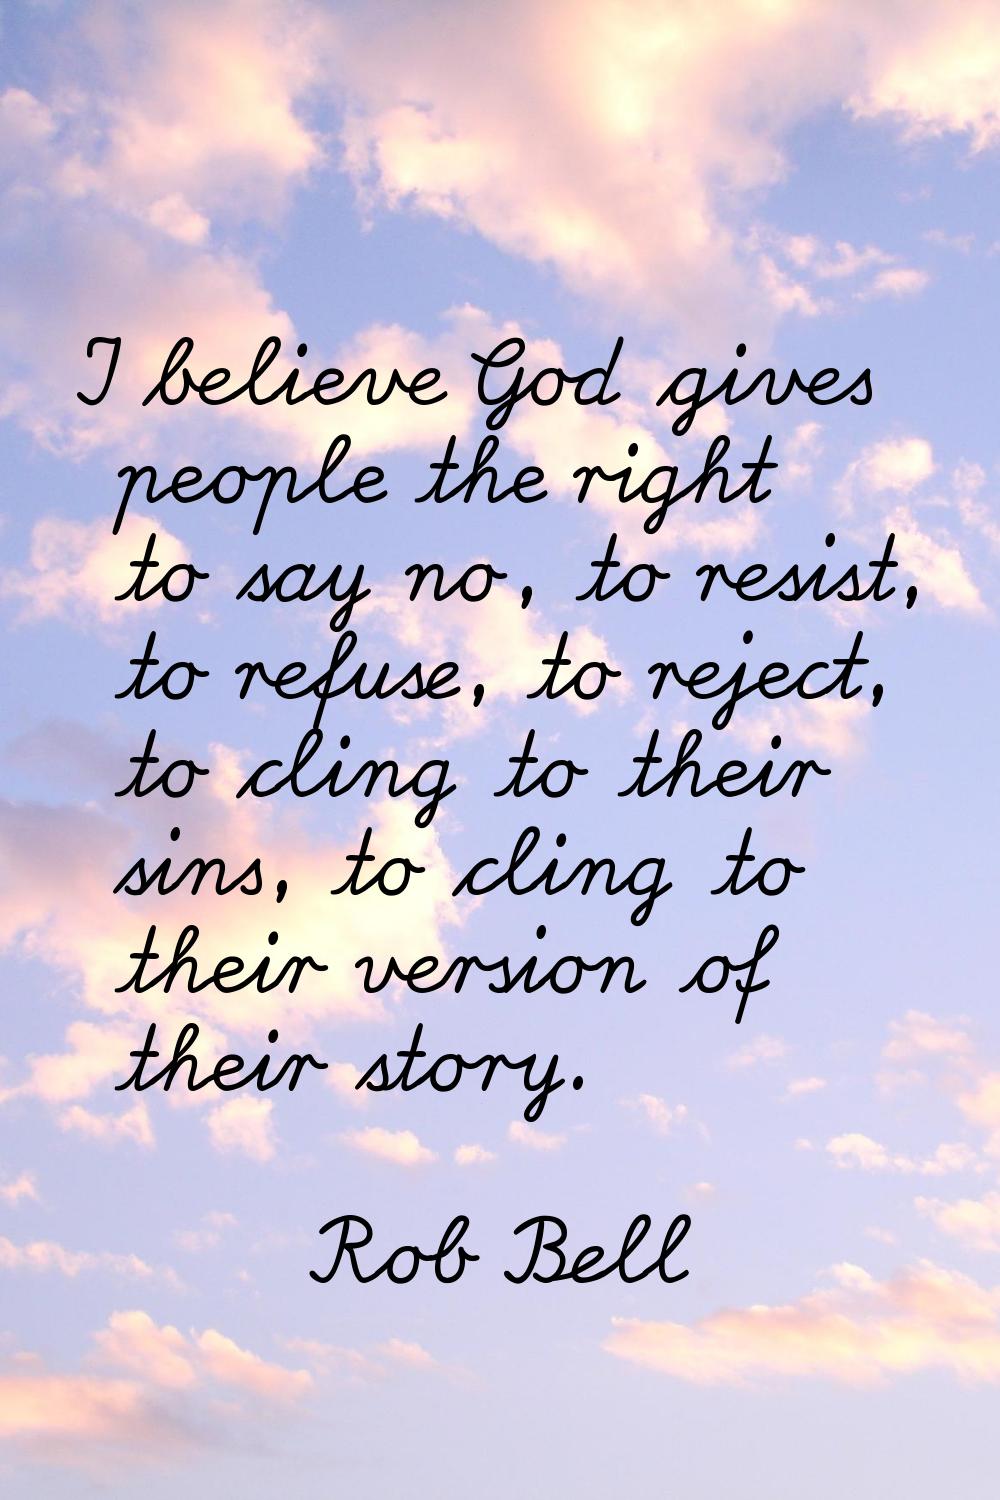 I believe God gives people the right to say no, to resist, to refuse, to reject, to cling to their 